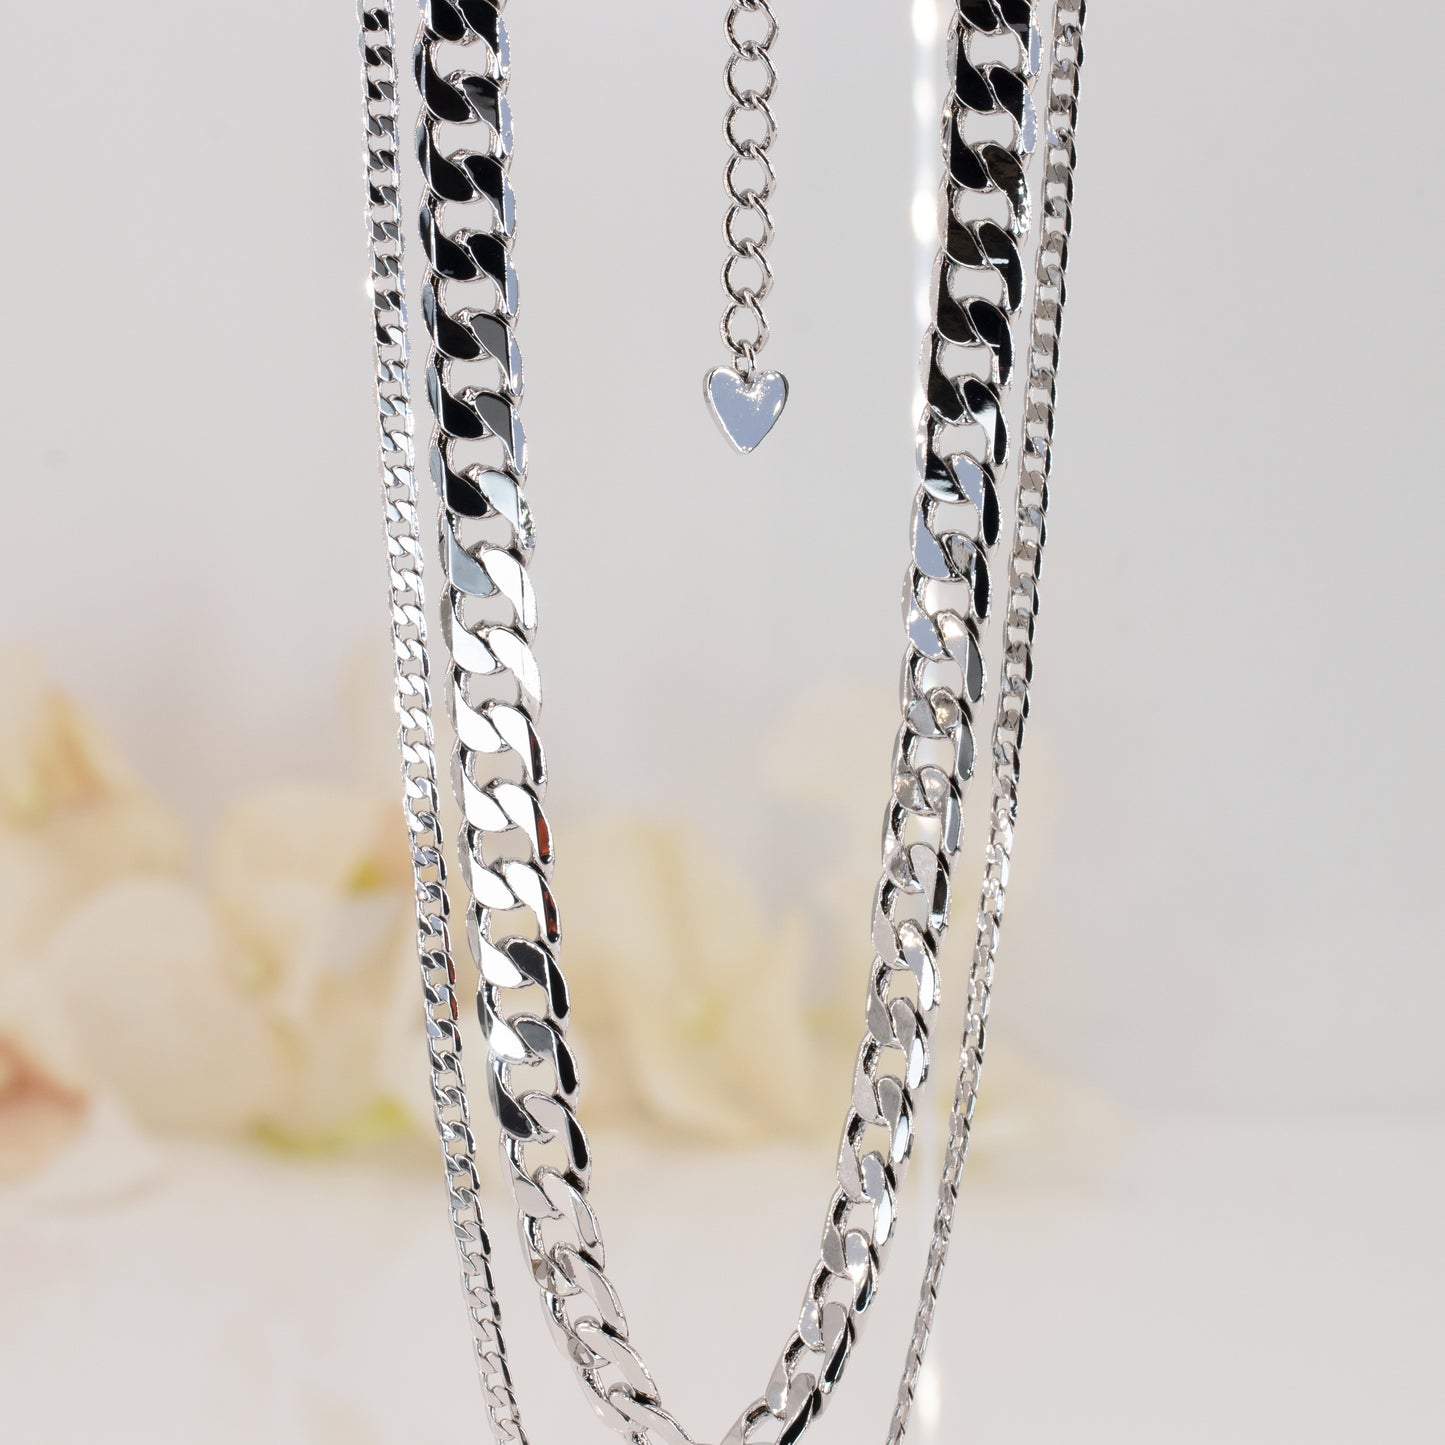 Chunky Chain Necklaces Set